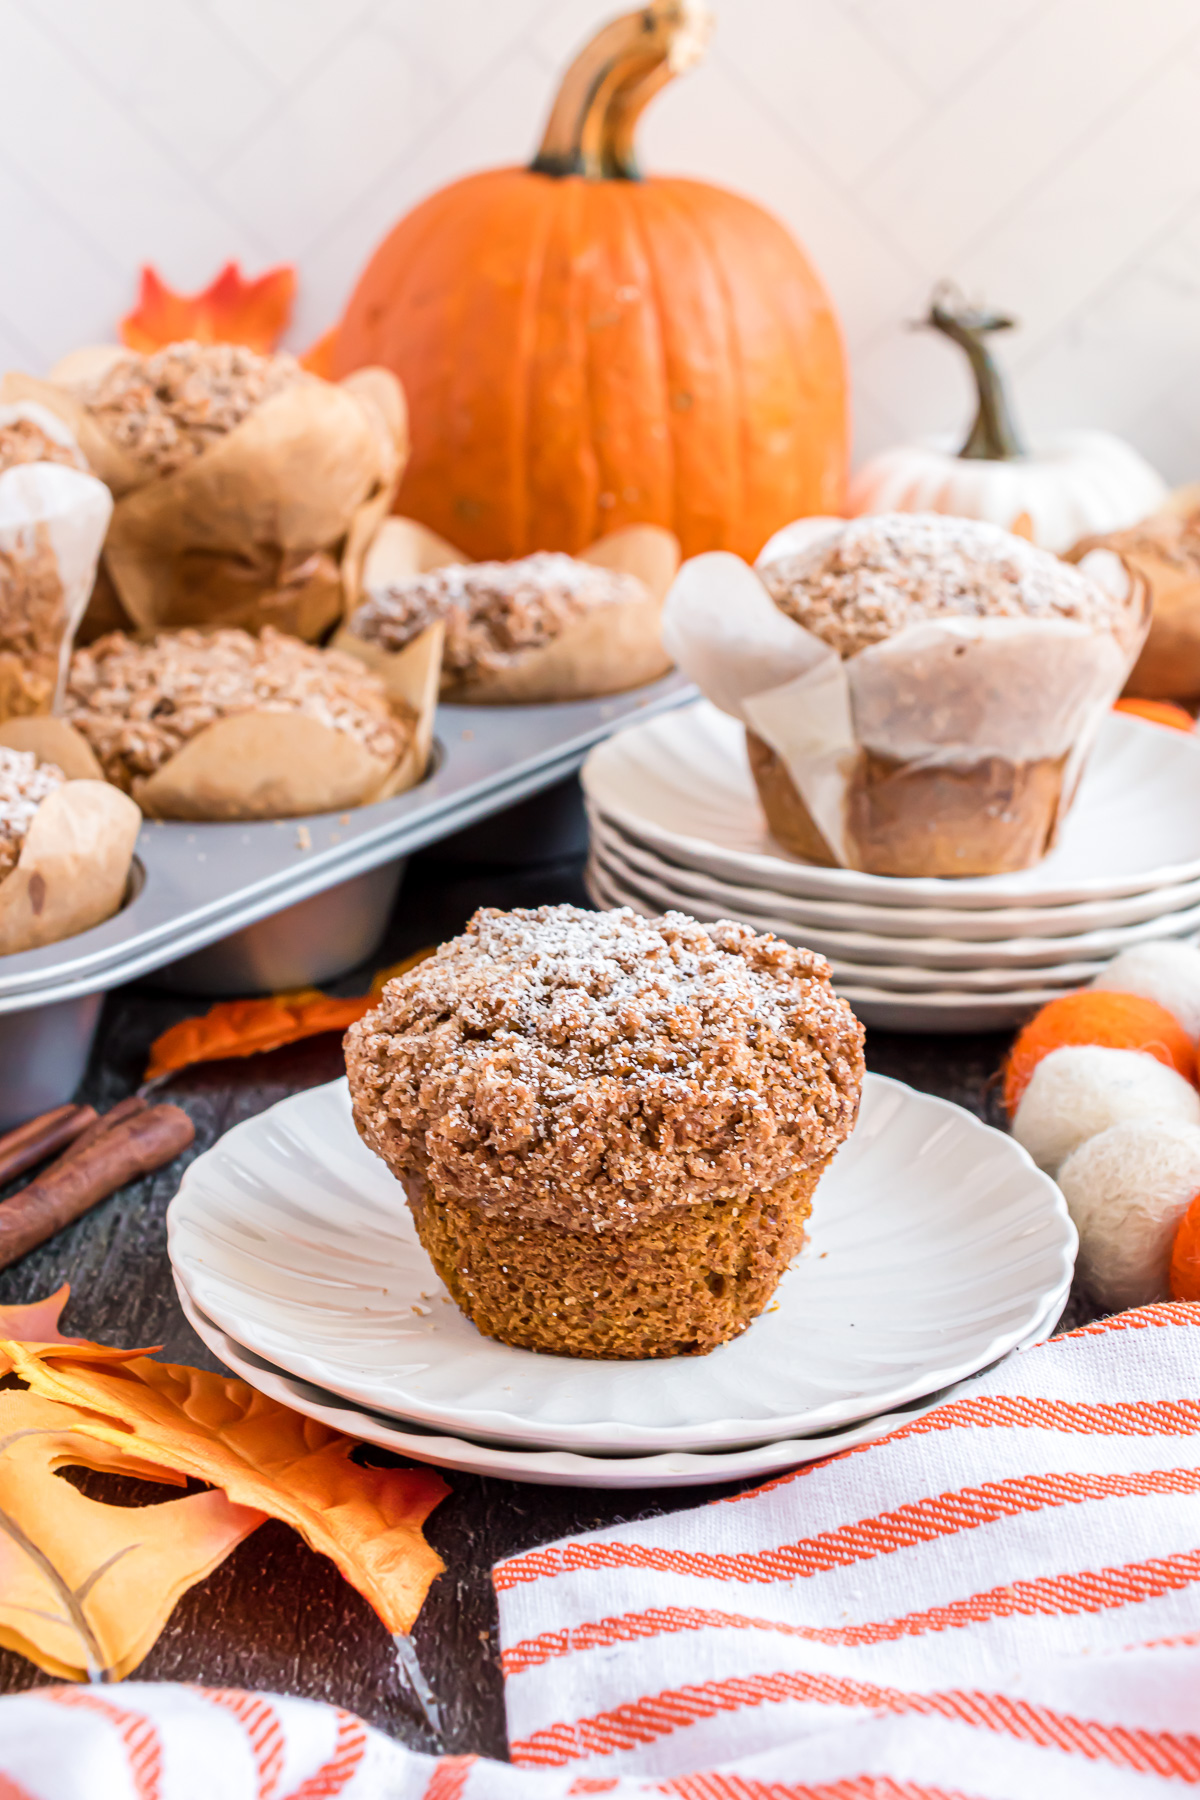 A muffin made with the Panera Bread Pumpkin Muiffin recipe sits on a white plate with a tin full of muffins and a large pumpkin behind it.